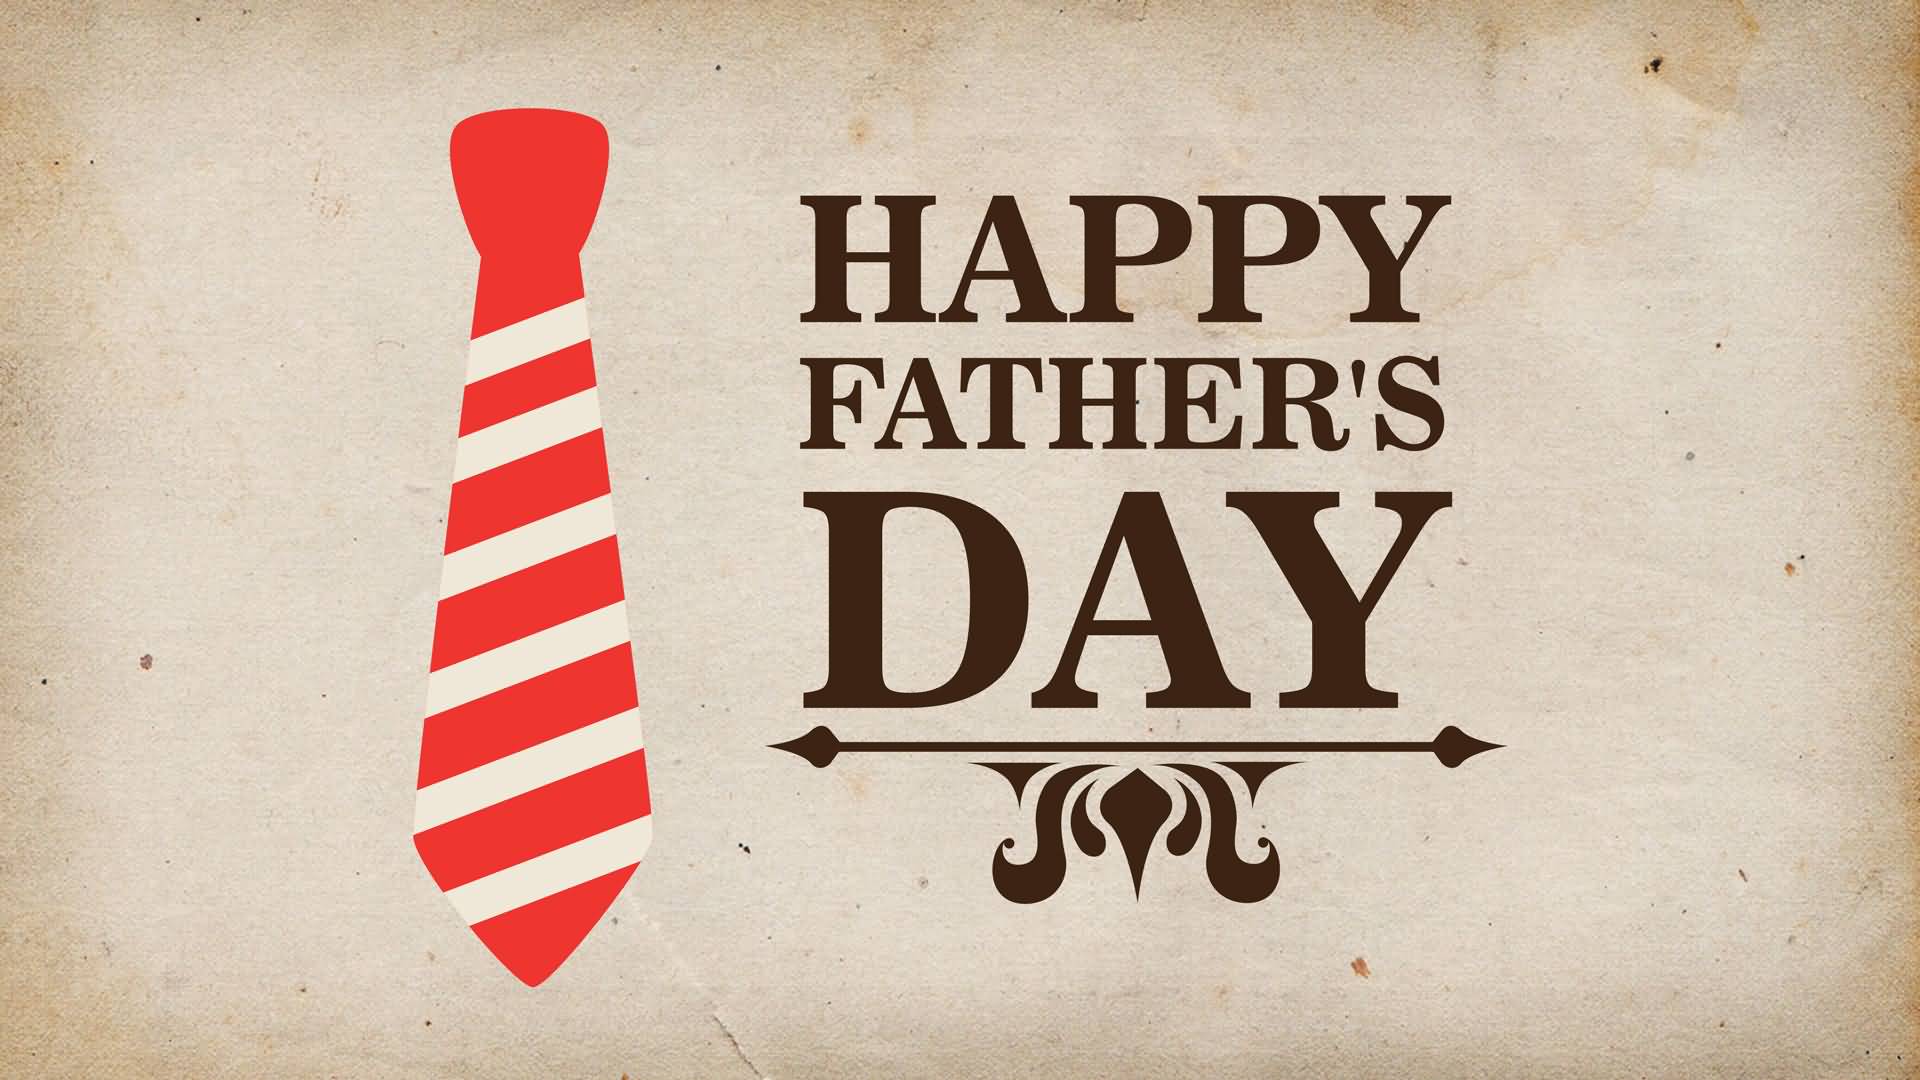 Happy Fathers Day Wishes Greeting